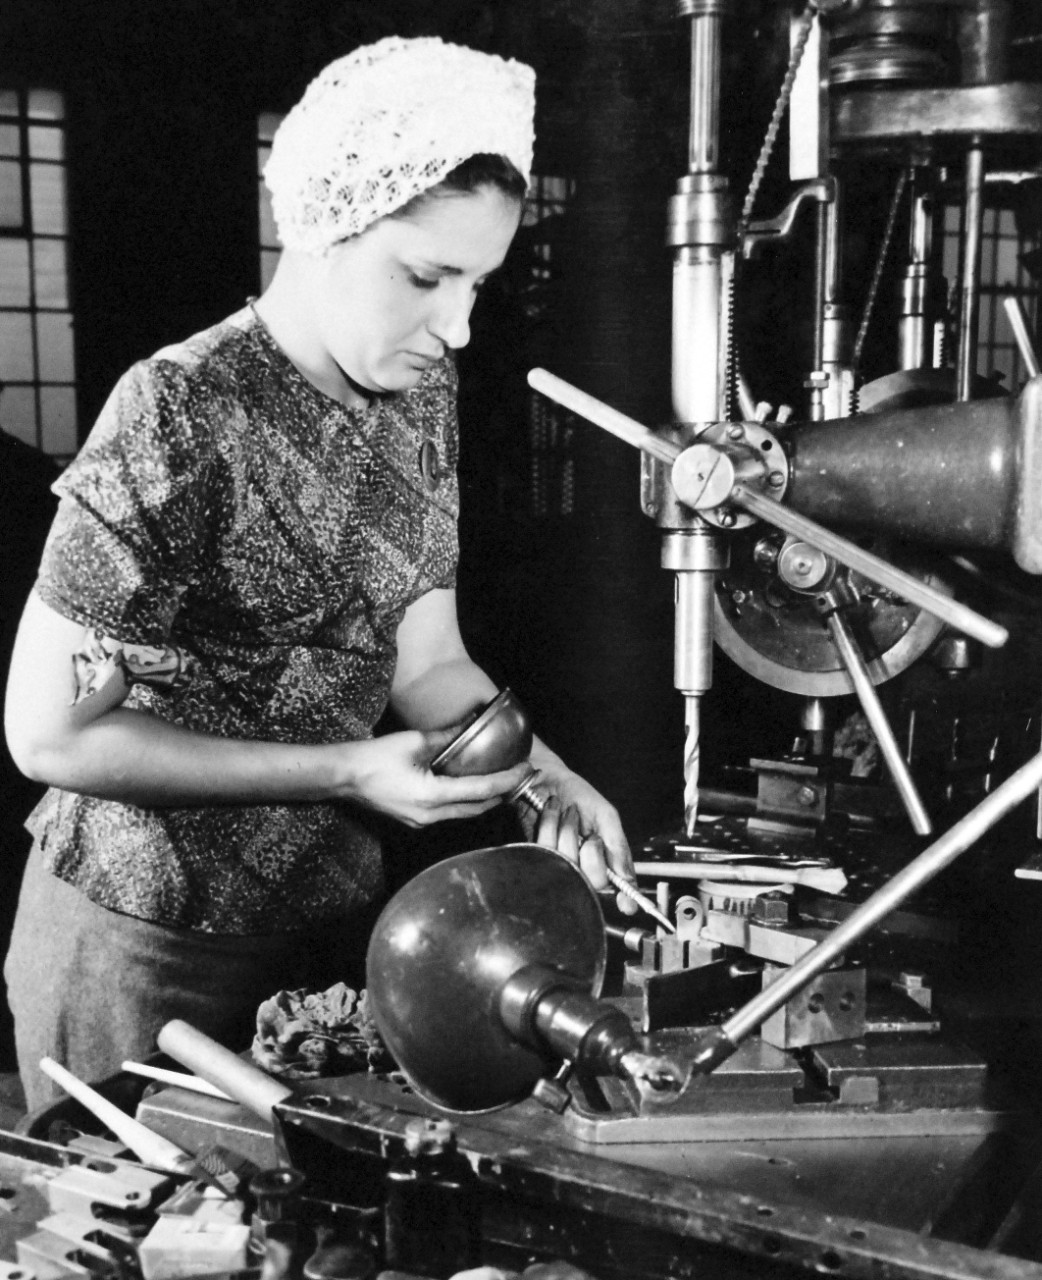 80-G-38498:  U.S. Naval Gun Factory, Washington Navy Yard, 1943.  Shown:  Female employee preparing to drill accurately located hole in a small naval gun detail.  Photograph released March 20, 1943.   Official U.S. Navy photograph, now in the collections of the National Archives.  